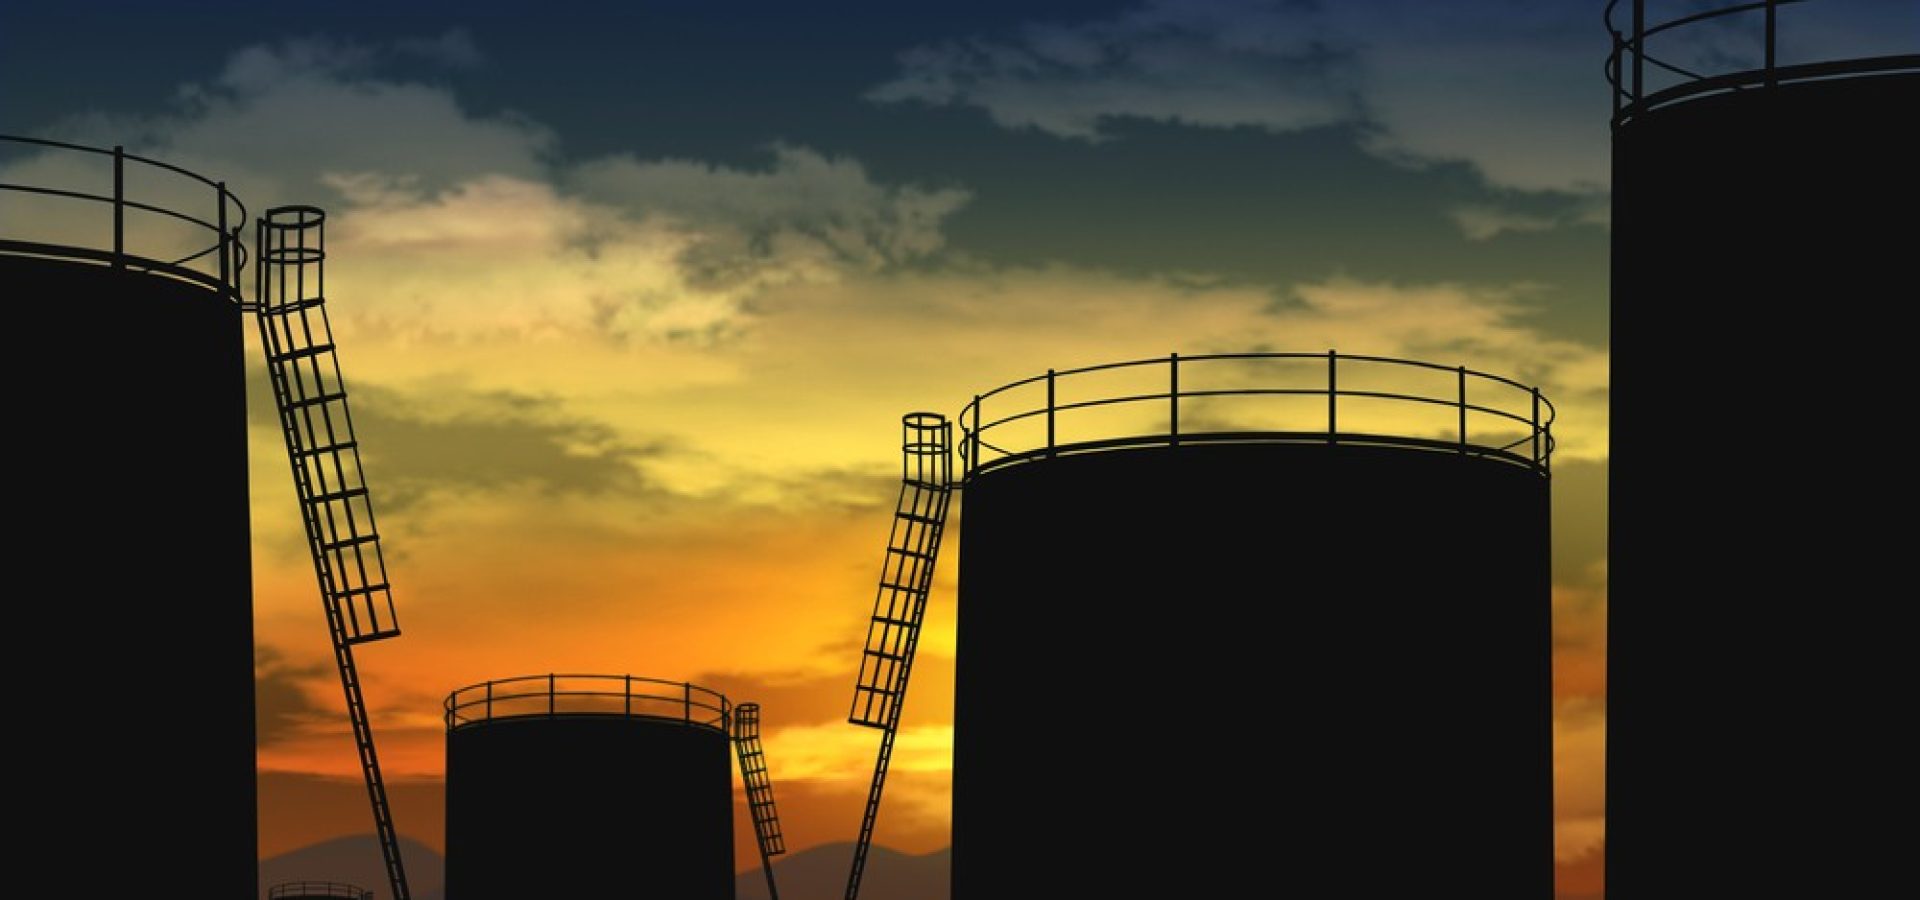 Wibest – Crude: Crude oil refineries over the sunset.